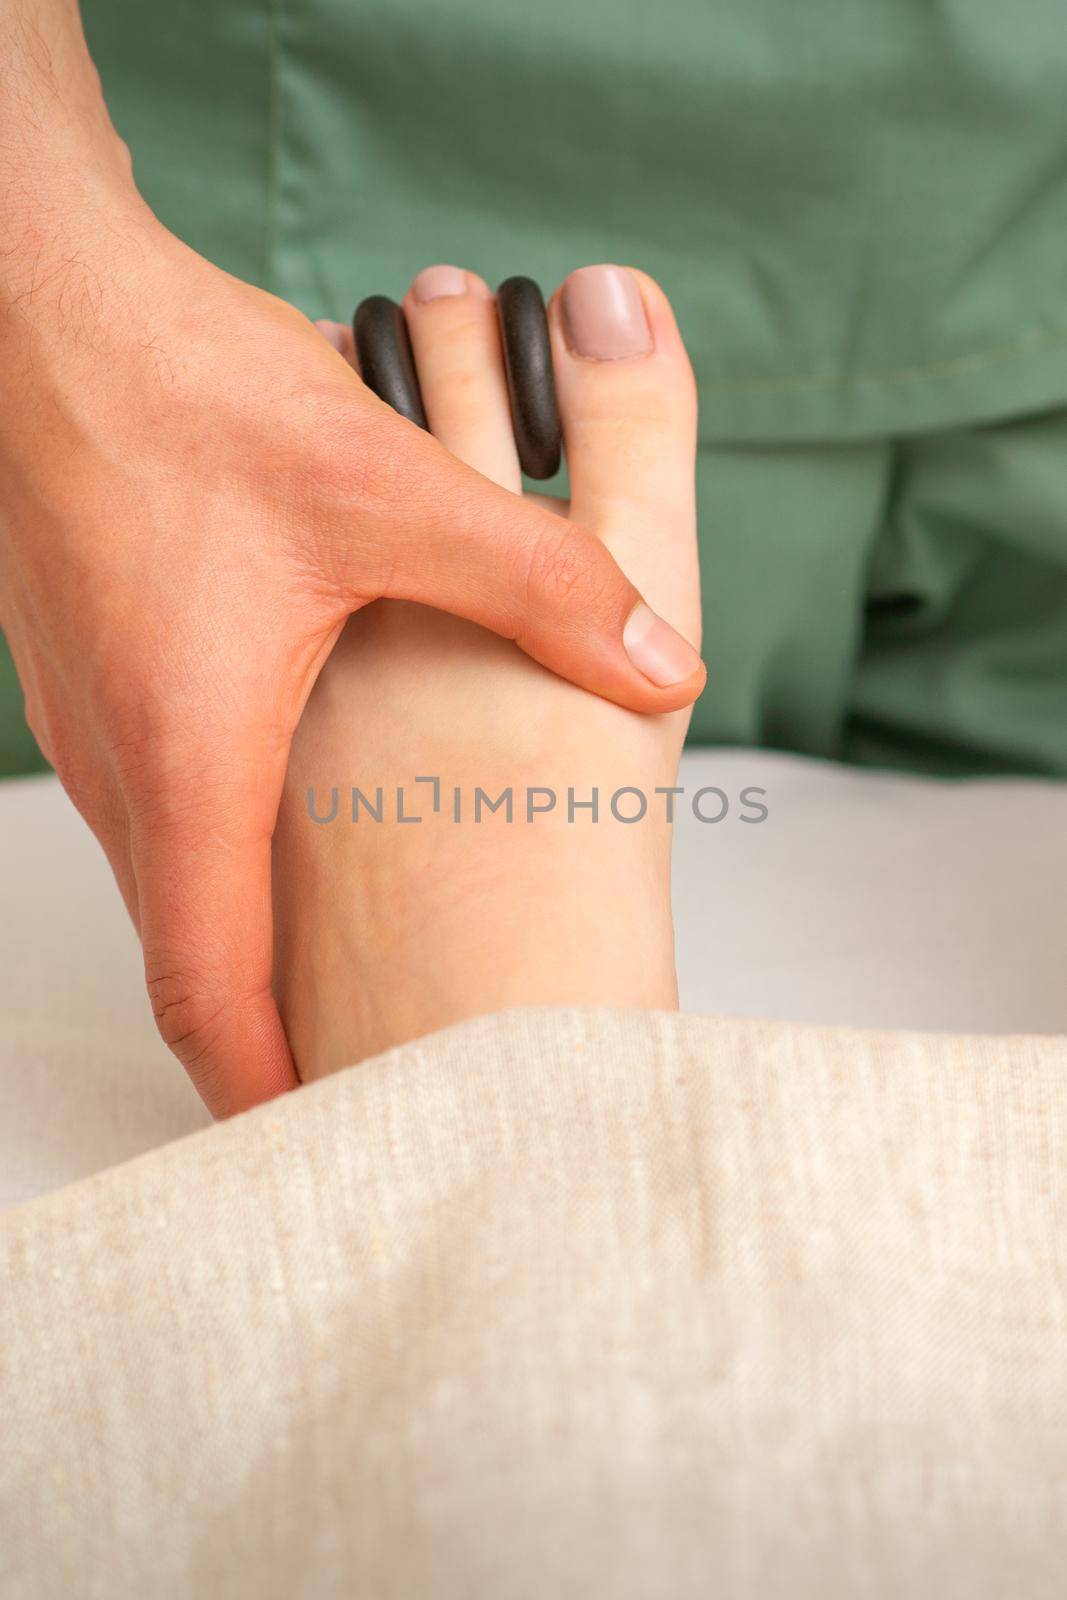 Massager doing feet and toes massage with rocks between a female toes